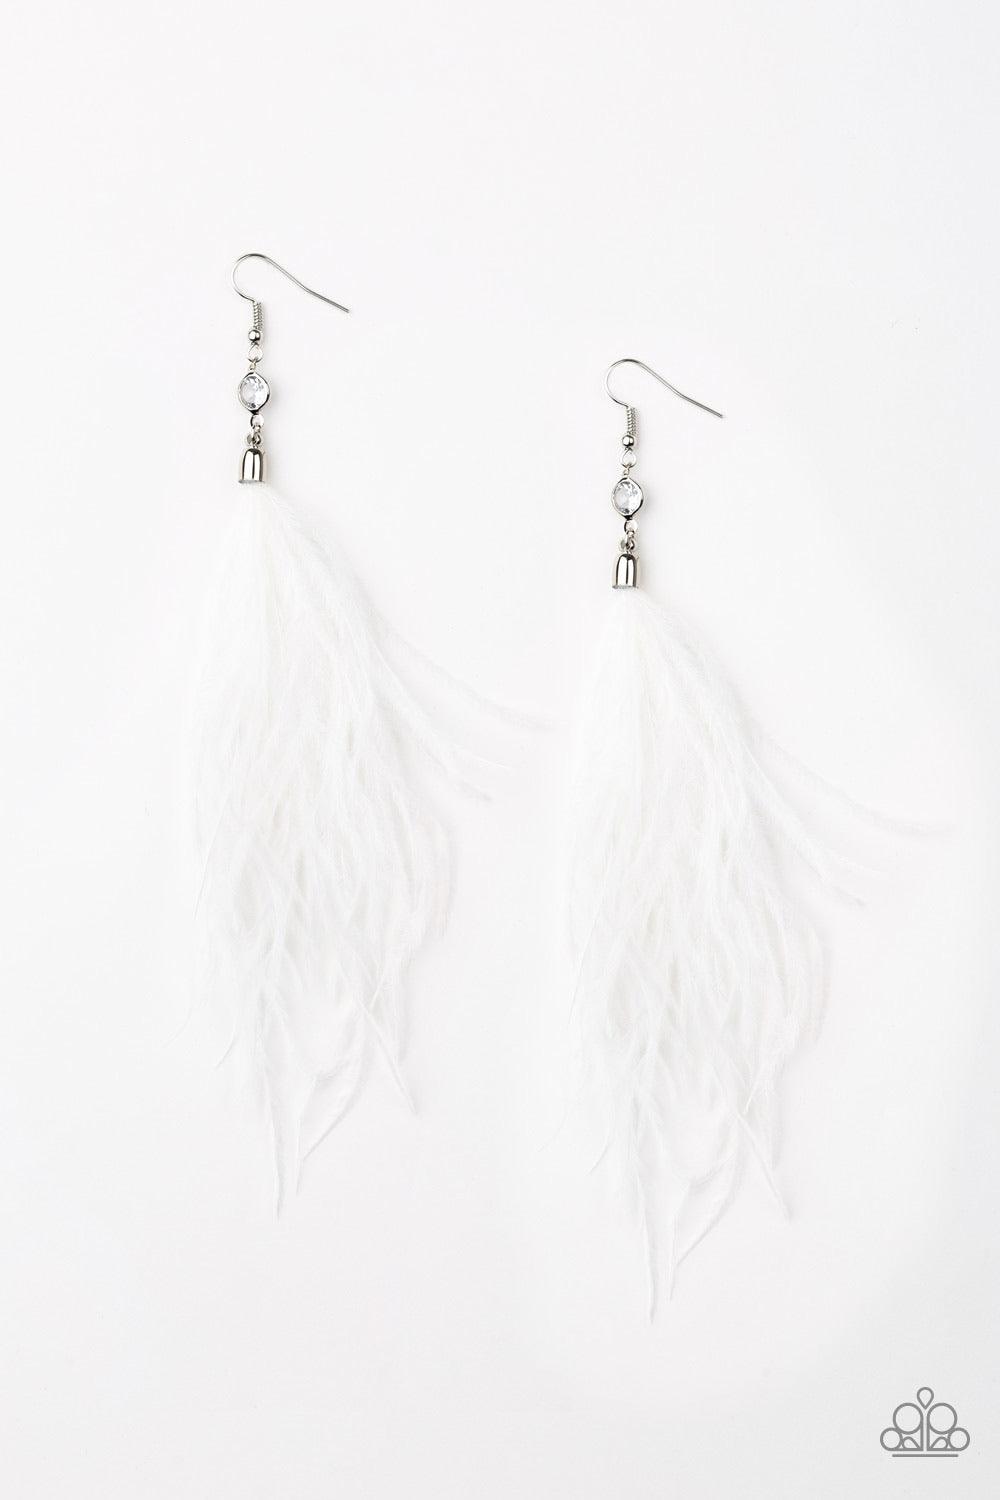 Paparazzi Accessories The SHOWGIRL Next Door - White A soft plume of white feathers attaches to a dainty white rhinestone frame, creating a flirtatious fringe. Earring attaches to a standard fishhook fitting. Jewelry